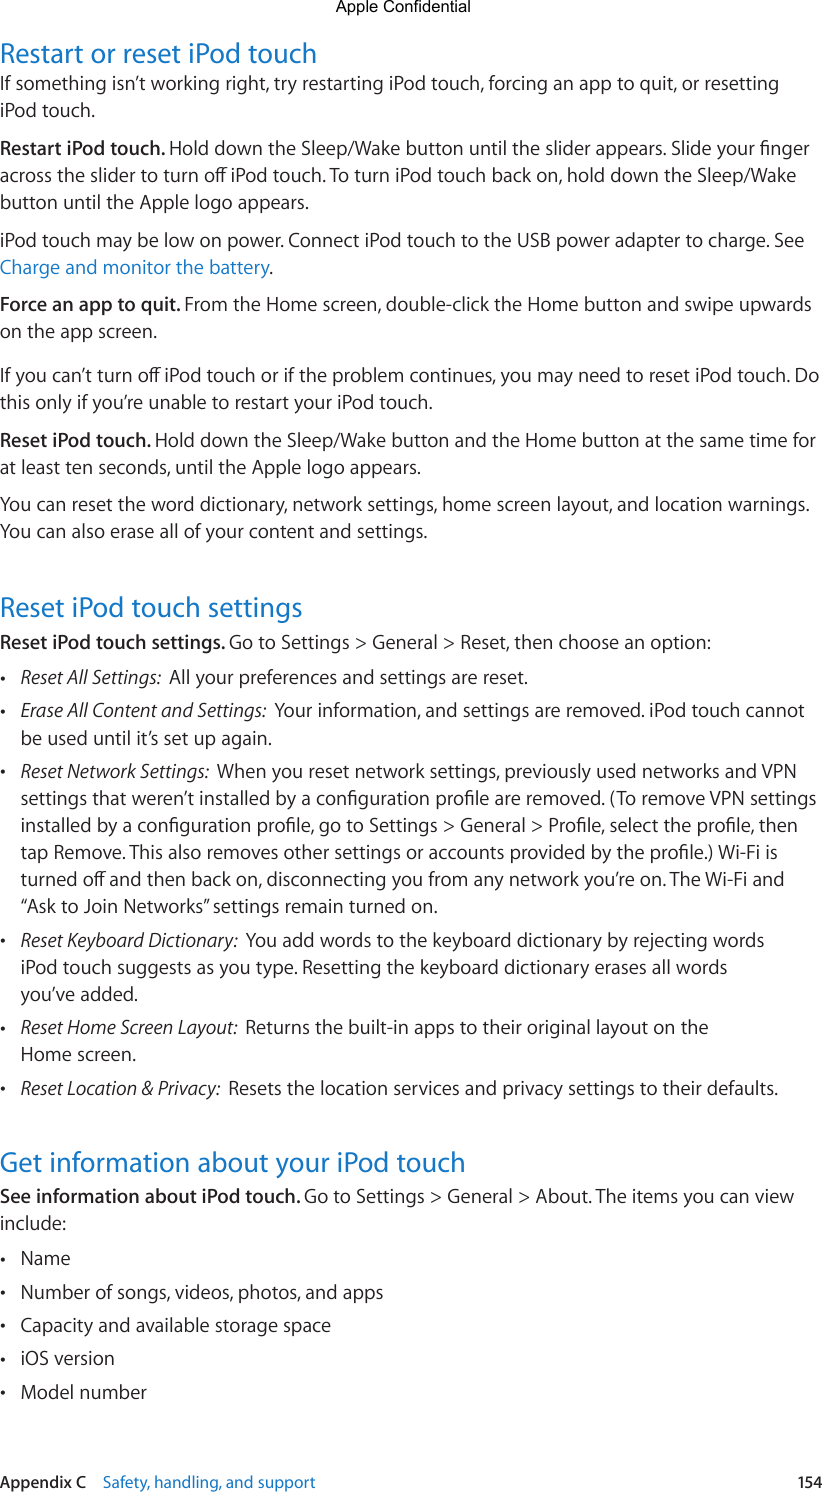 Appendix C    Safety, handling, and support  154Restart or reset iPod touchIf something isn’t working right, try restarting iPod touch, forcing an app to quit, or resetting iPod touch.Restart iPod touch. HolddowntheSleep/Wakebuttonuntilthesliderappears.SlideyourngeracrosstheslidertoturnoiPodtouch.ToturniPodtouchbackon,holddowntheSleep/Wakebutton until the Apple logo appears.iPod touch may be low on power. Connect iPod touch to the USB power adapter to charge. See Charge and monitor the battery.Force an app to quit. From the Home screen, double-click the Home button and swipe upwards on the app screen.Ifyoucan’tturnoiPodtouchoriftheproblemcontinues,youmayneedtoresetiPodtouch.Dothis only if you’re unable to restart your iPod touch.Reset iPod touch. Hold down the Sleep/Wake button and the Home button at the same time for at least ten seconds, until the Apple logo appears.You can reset the word dictionary, network settings, home screen layout, and location warnings. You can also erase all of your content and settings.Reset iPod touch settingsReset iPod touch settings. Go to Settings &gt; General &gt; Reset, then choose an option: •Reset All Settings:  All your preferences and settings are reset. •Erase All Content and Settings:  Your information, and settings are removed. iPod touch cannotbe used until it’s set up again. •Reset Network Settings:  When you reset network settings, previously used networks and VPNsettingsthatweren’tinstalledbyacongurationproleareremoved.(ToremoveVPNsettingsinstalledbyacongurationprole,gotoSettings&gt;General&gt;Prole,selecttheprole,thentapRemove.Thisalsoremovesothersettingsoraccountsprovidedbytheprole.)Wi-Fiisturnedoandthenbackon,disconnectingyoufromanynetworkyou’reon.TheWi-Fiand“Ask to Join Networks” settings remain turned on. •Reset Keyboard Dictionary:  You add words to the keyboard dictionary by rejecting wordsiPod touch suggests as you type. Resetting the keyboard dictionary erases all wordsyou’ve added. •Reset Home Screen Layout:  Returns the built-in apps to their original layout on theHome screen. •Reset Location &amp; Privacy:  Resets the location services and privacy settings to their defaults.Get information about your iPod touchSee information about iPod touch. Go to Settings &gt; General &gt; About. The items you can view include: •Name •Number of songs, videos, photos, and apps •Capacity and available storage space •iOS version •Model numberApple Confidential